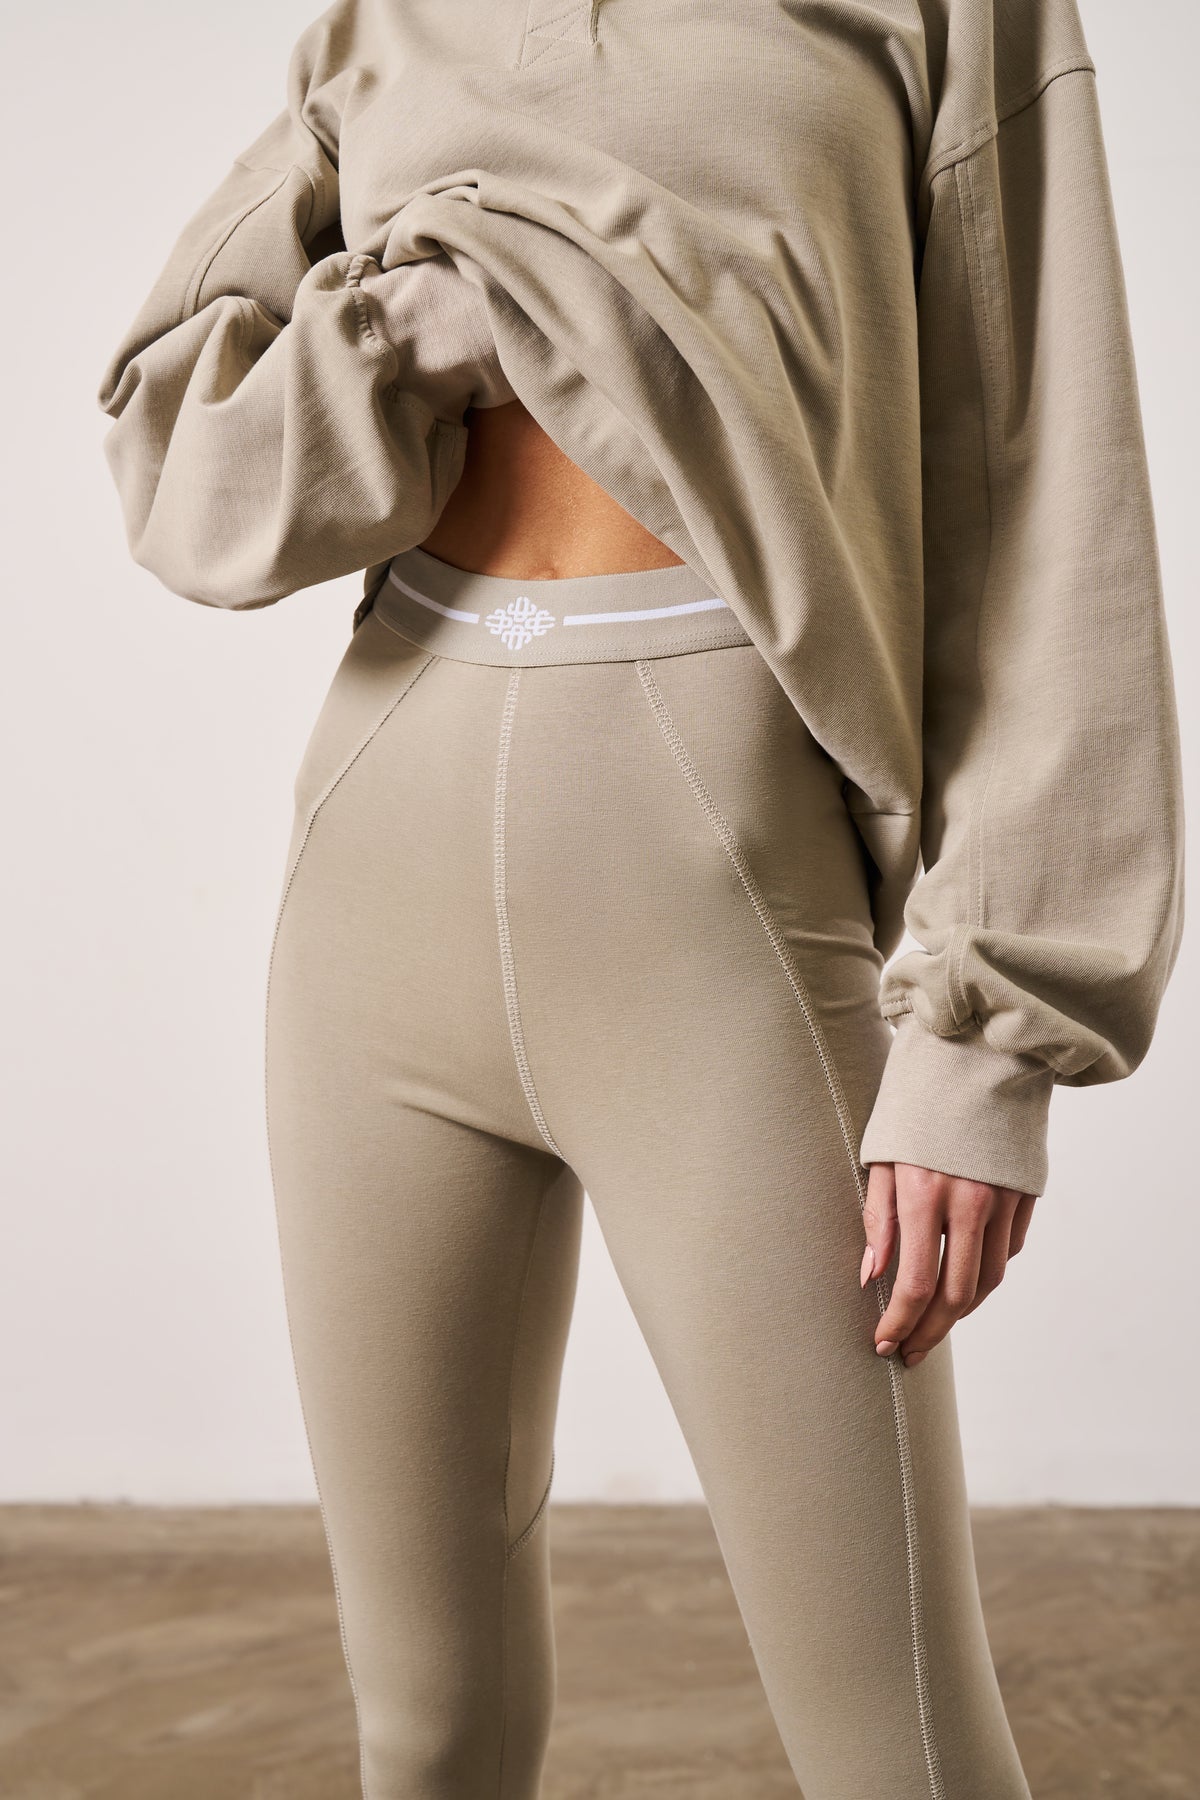 EMBLEM JERSEY LEGGINGS - BEIGE – The Couture Club